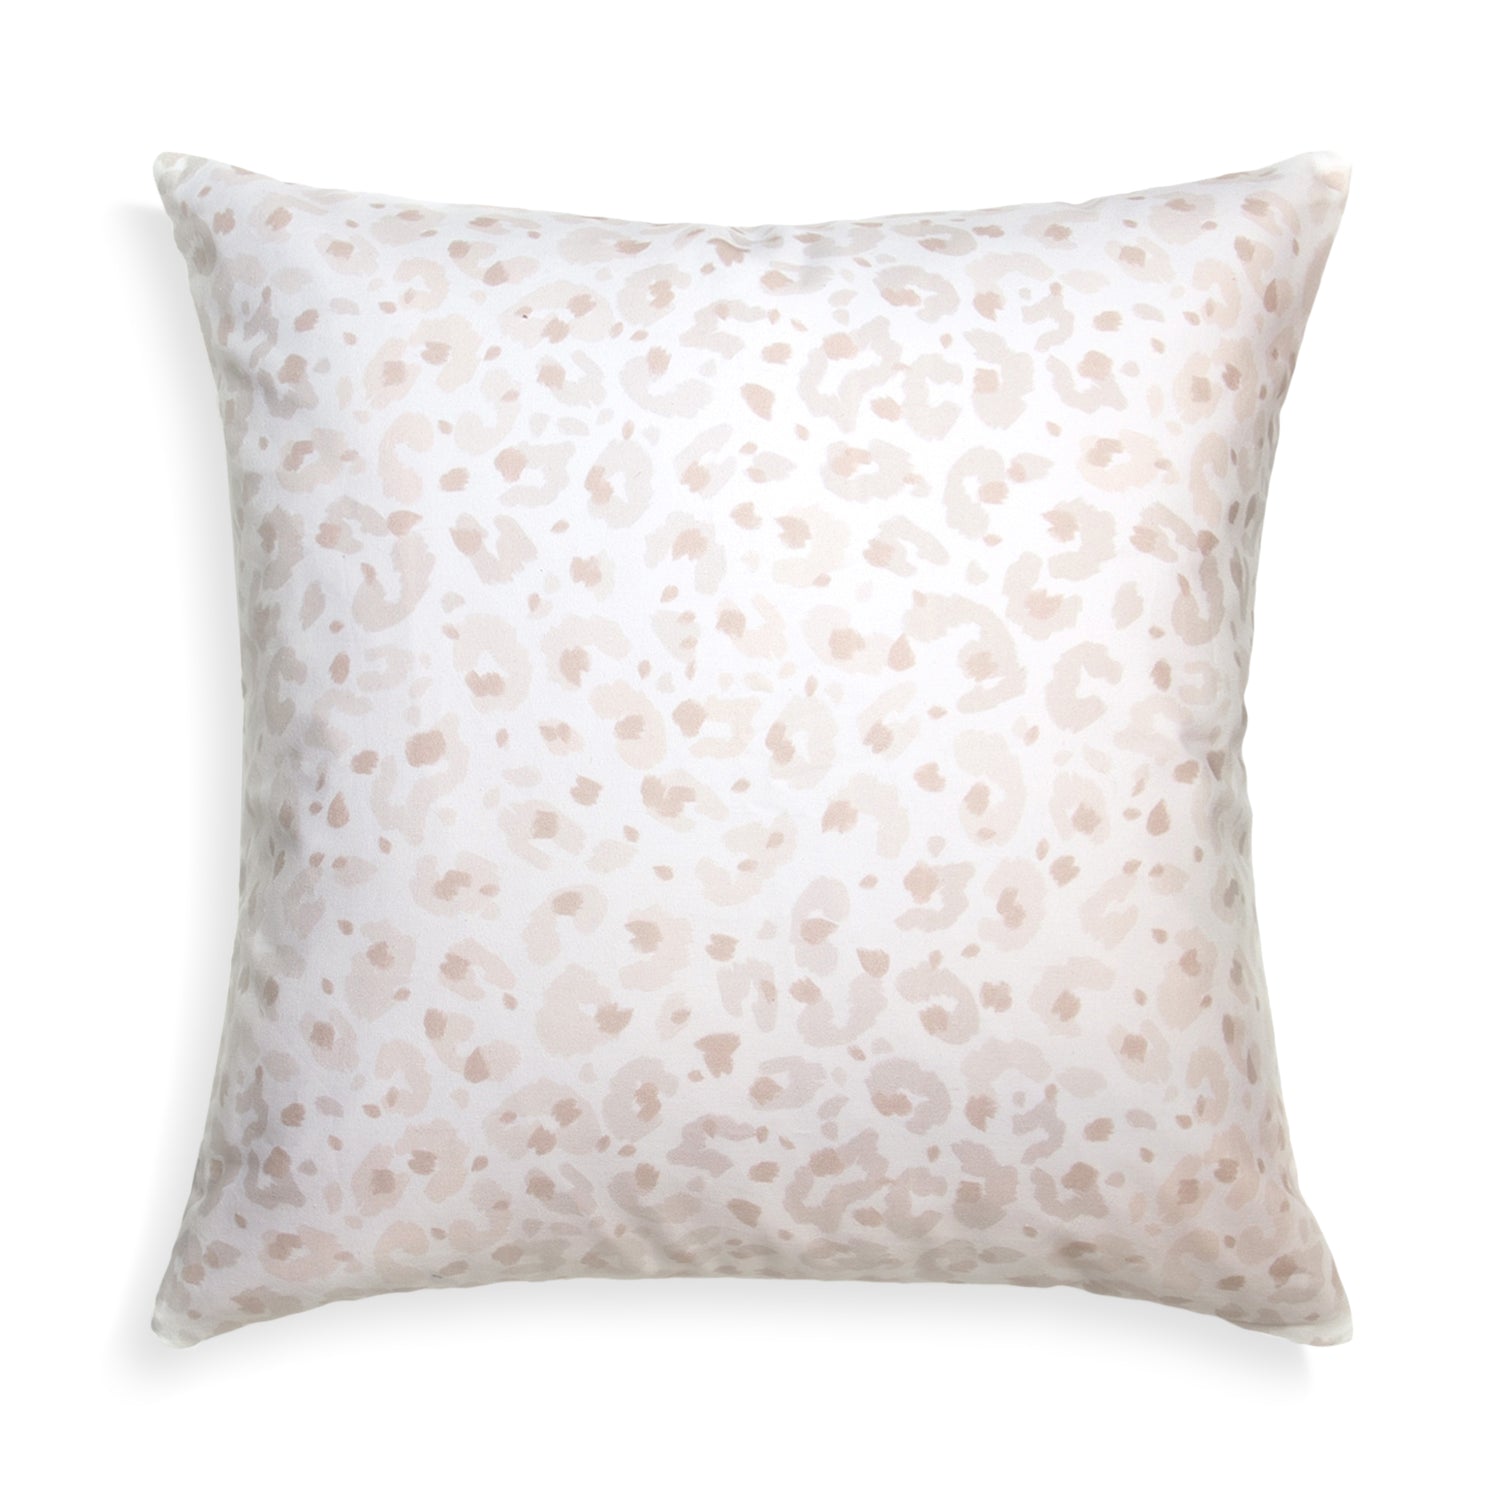 PEPPER seat cushion in creamy beige made of cotton